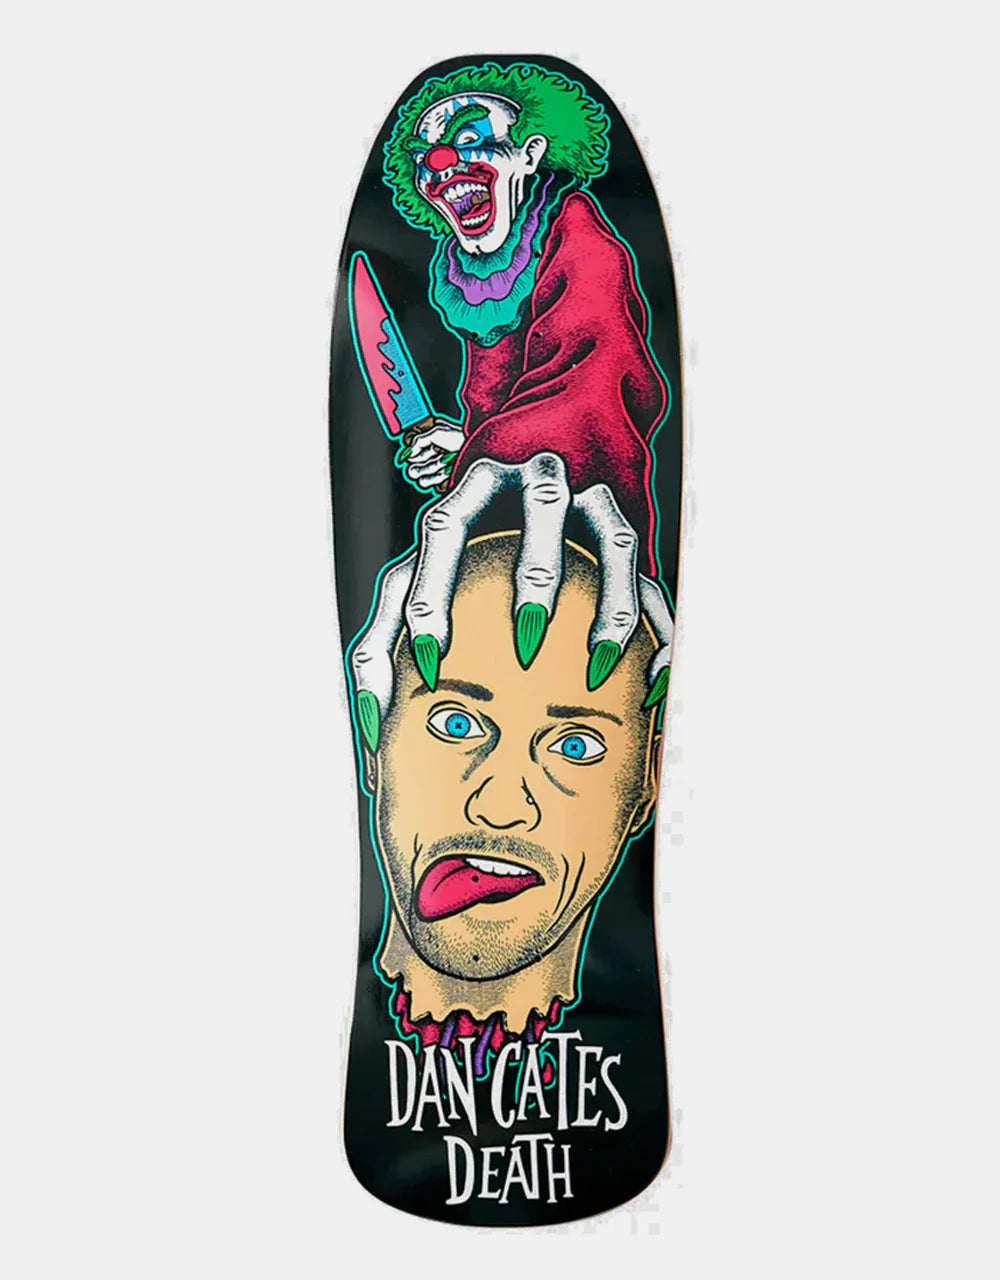 Death Cates Killer Clown II 9.375" shaped deck FREE Grip tape and Hardware